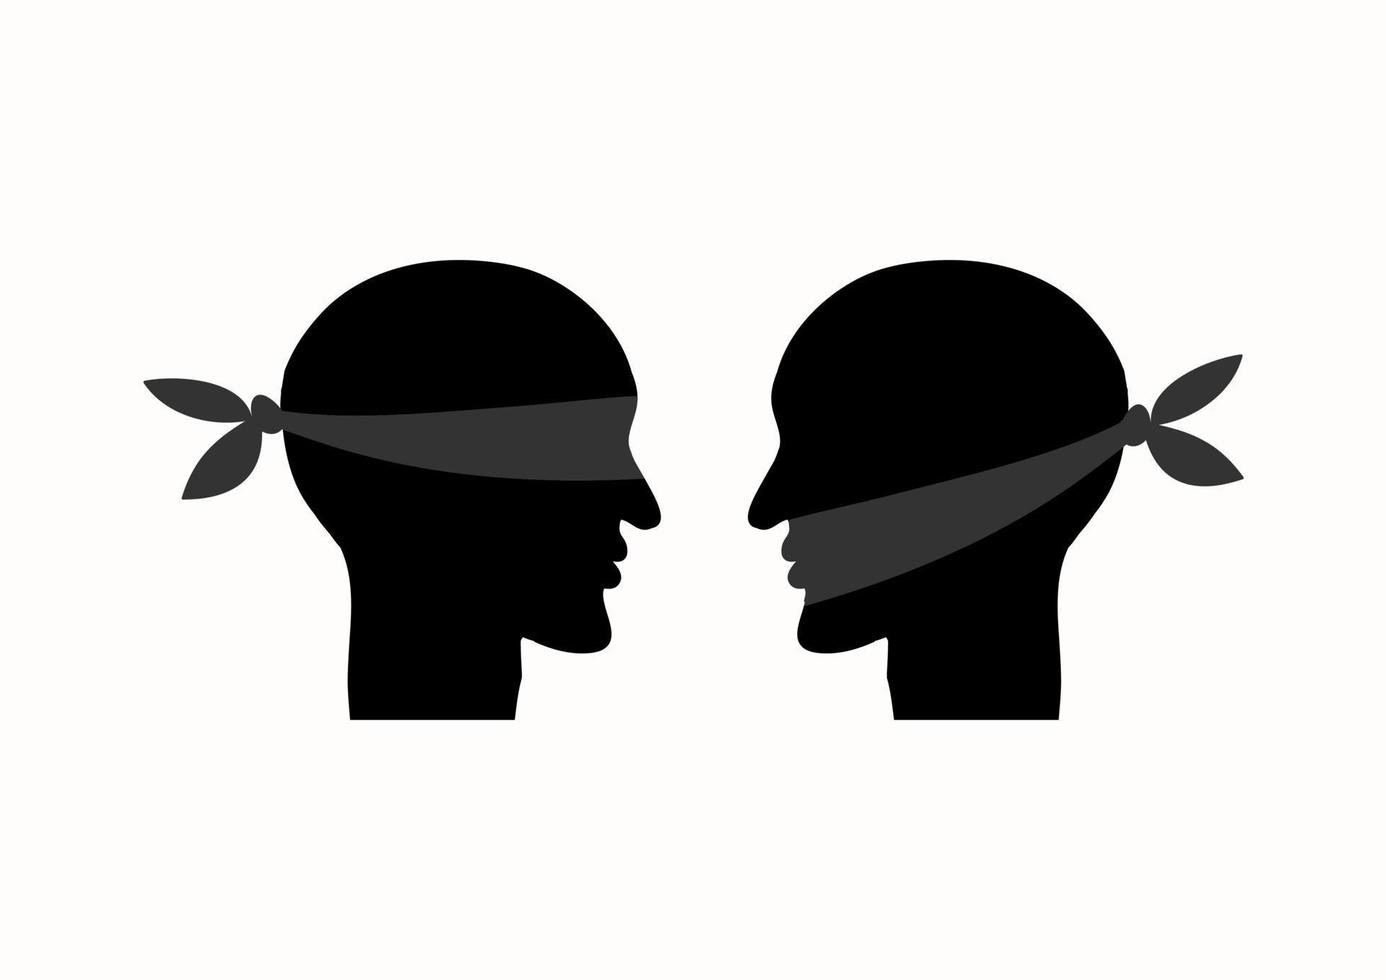 Mouth tied, blindfolded. vector